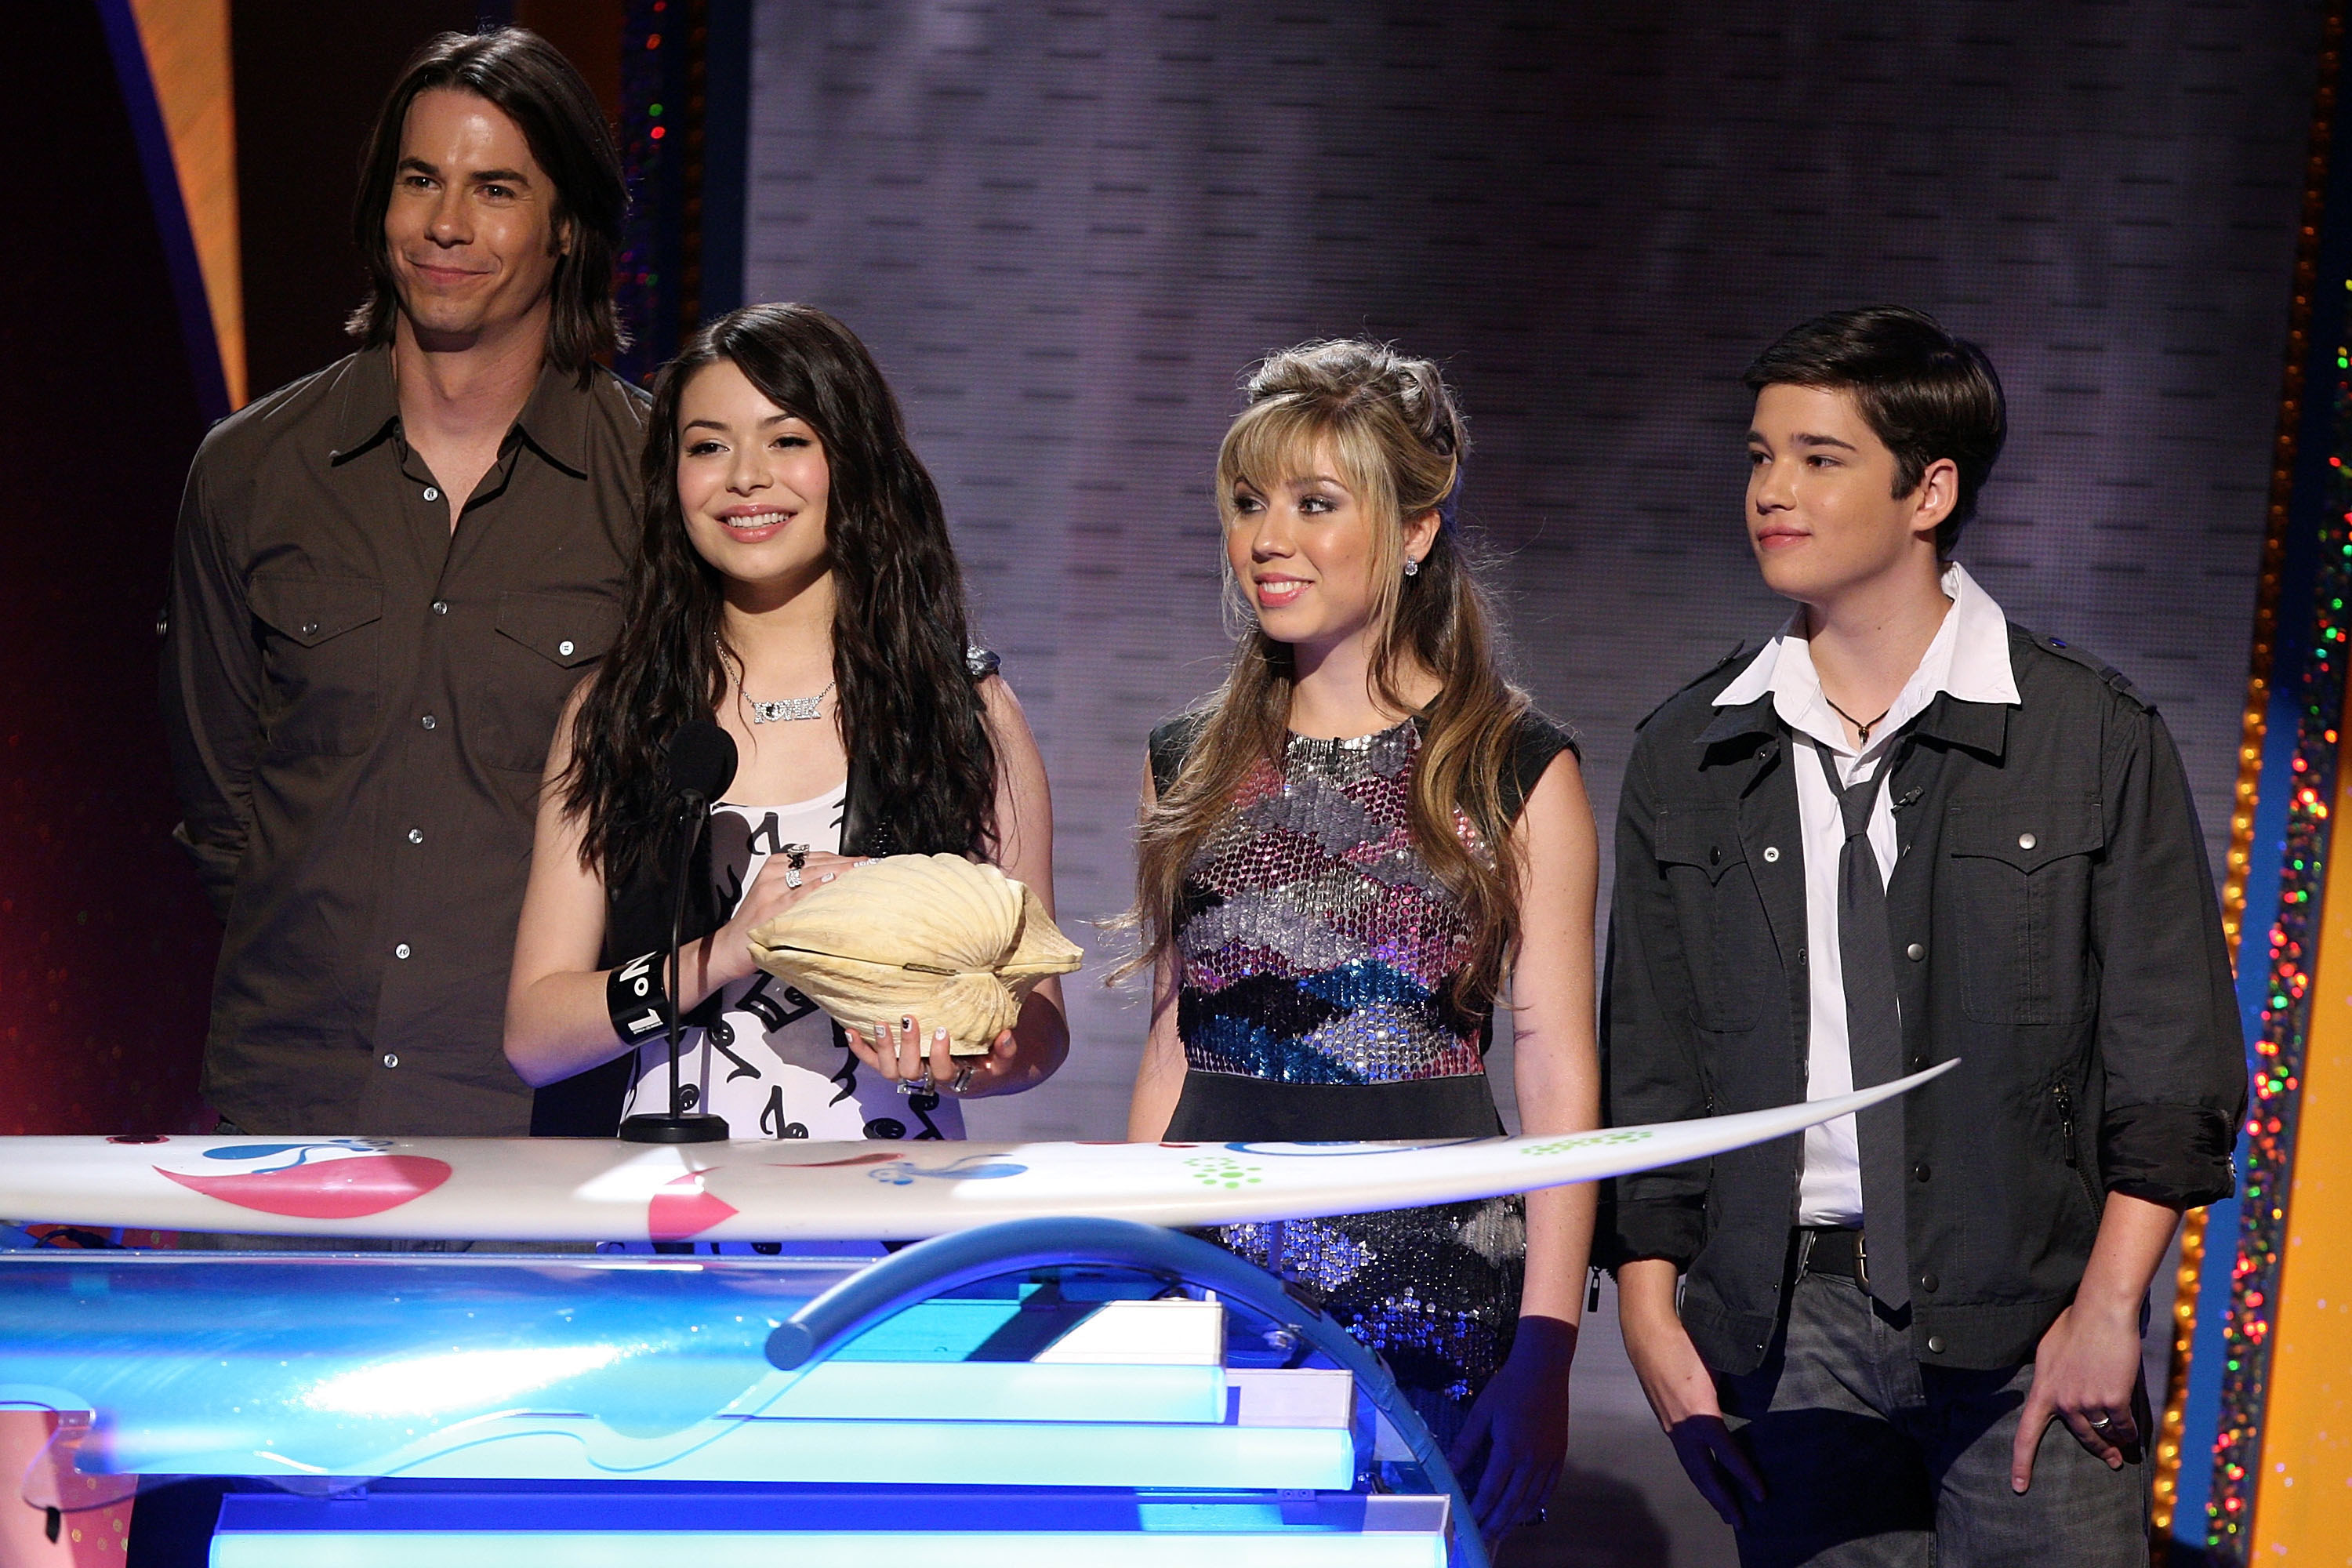 the cast of iCarly accepting an award